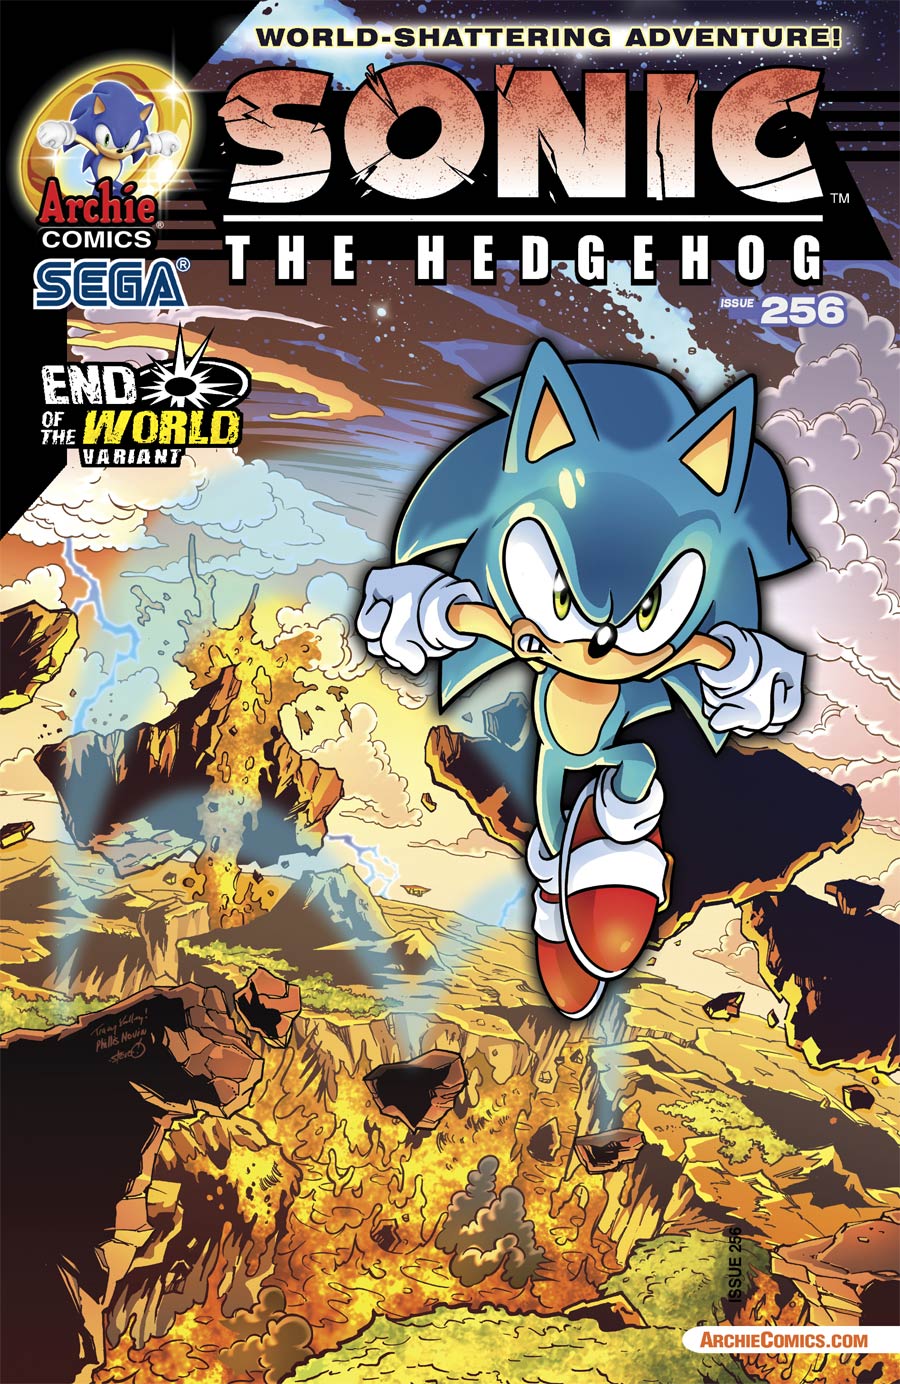 Sonic The Hedgehog Vol 2 #256 Cover B Variant End Of The World Cover